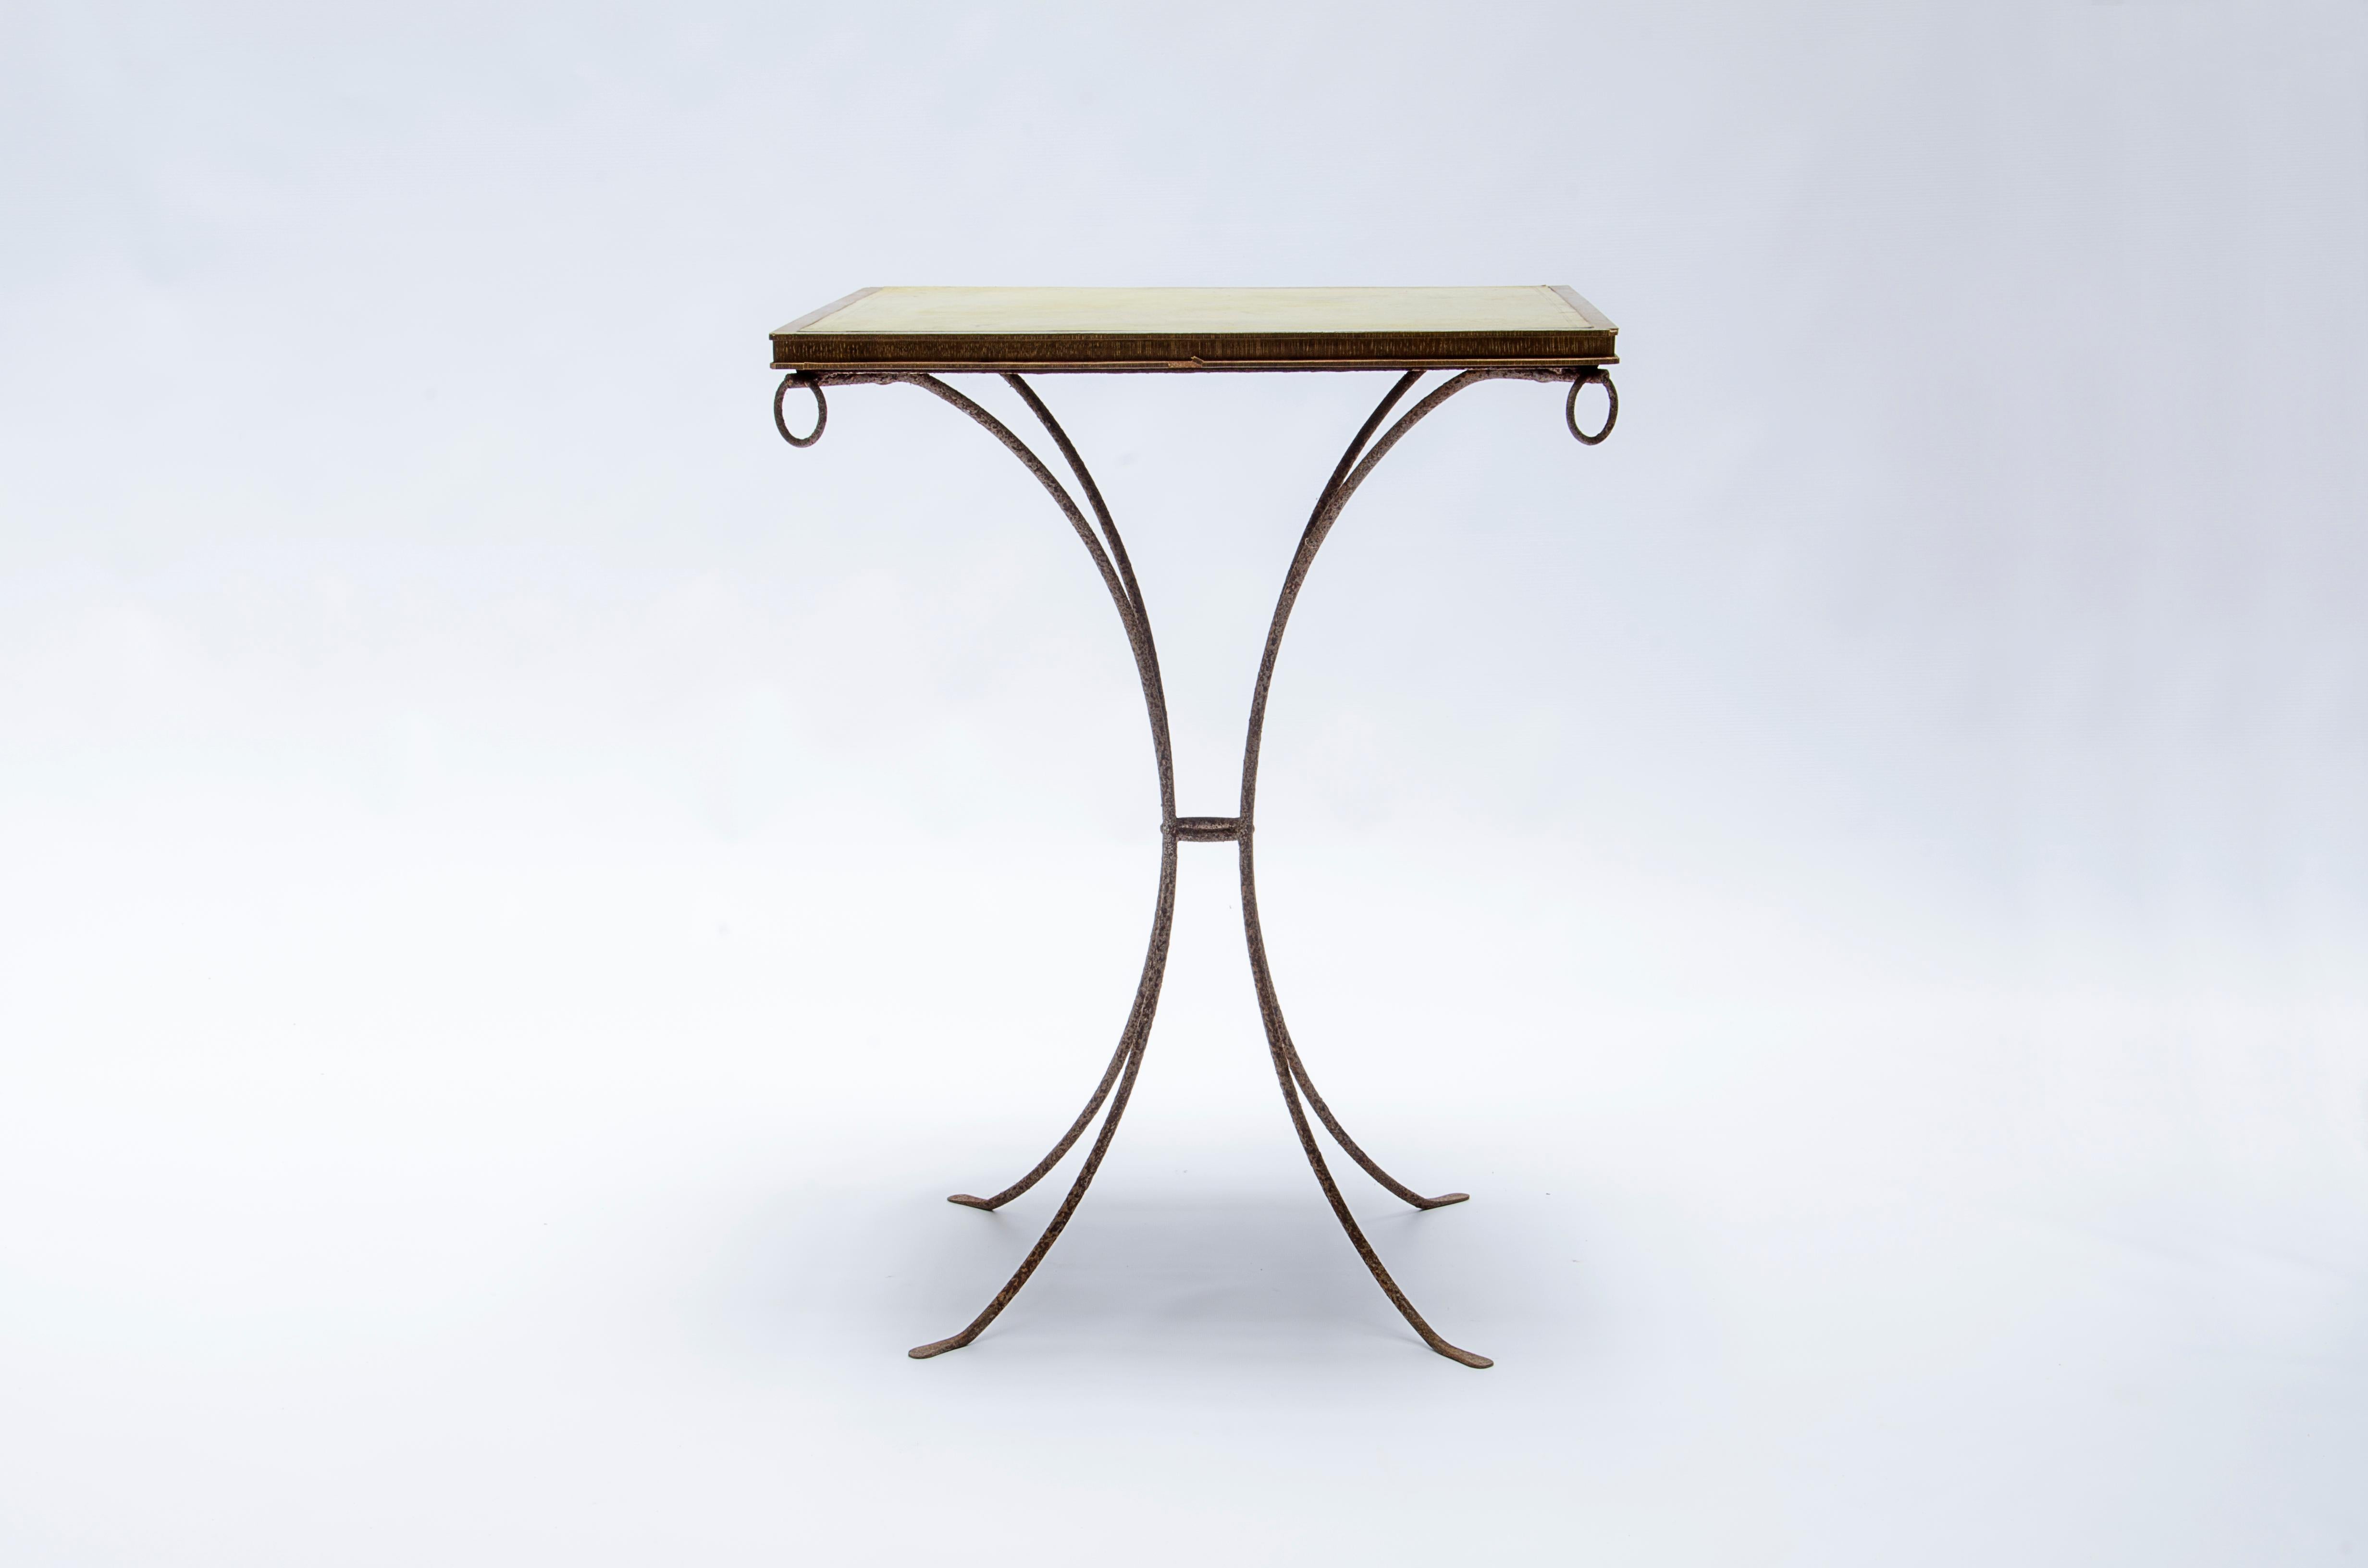 Gueridon table with iron structure, decapé oak wood top and yellow leather. Made by CASA COMTE (1932-1960).

Argentina, CIRCA 1940.

Mo Amelia Teitelbaum (2010) 